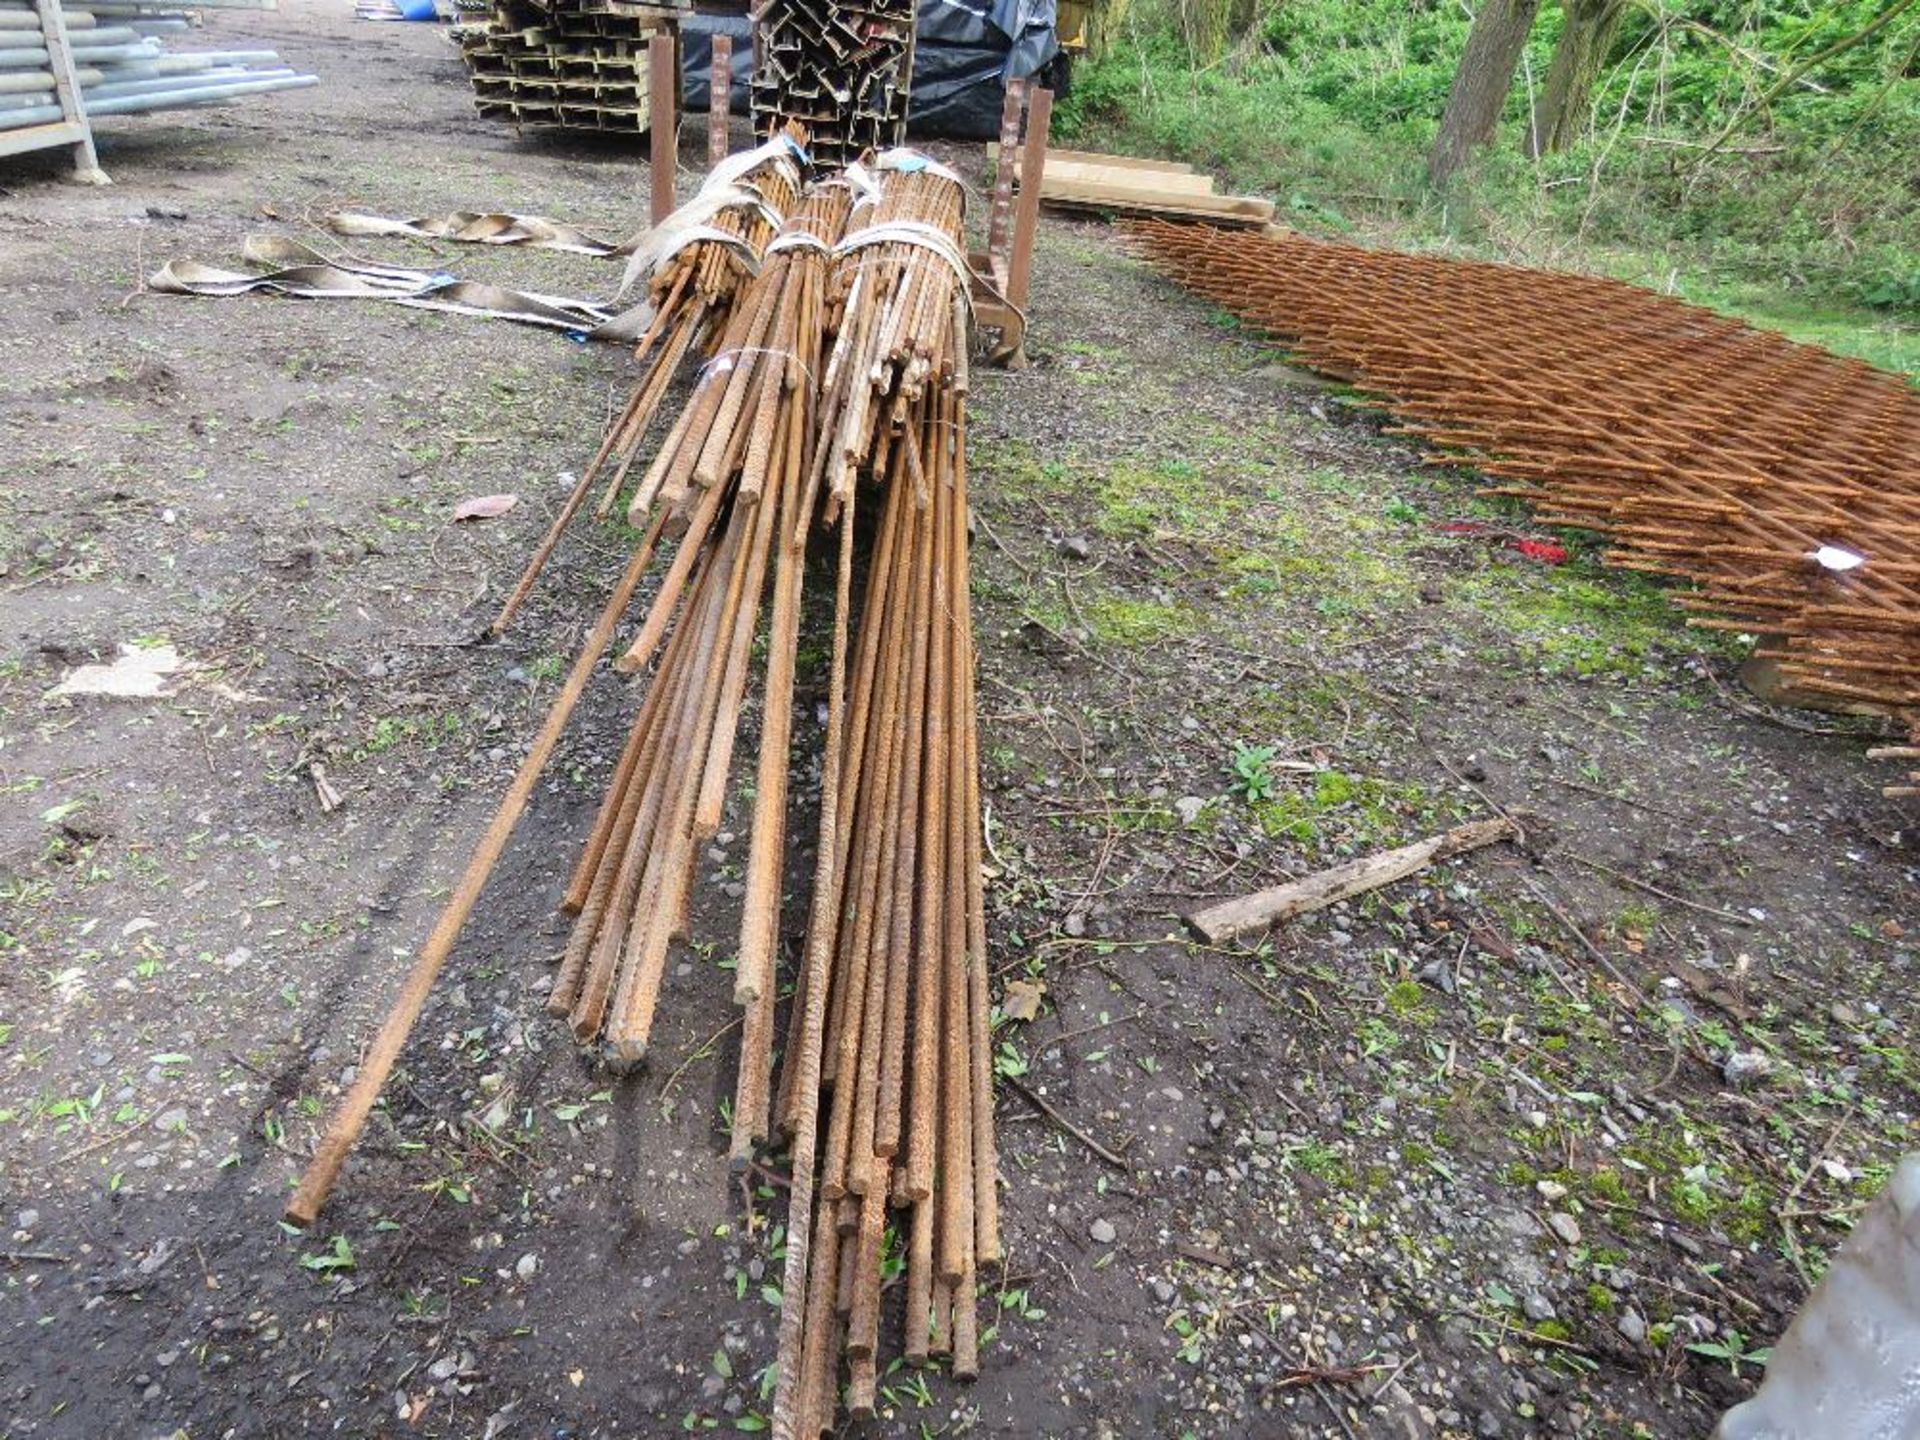 STILLAGE OF ASSORTED REBAR CONCRETE REINFORCING BAR 6FT -22FT APPROX SOURCED FROM COMPANY LIQUIDATI - Image 4 of 7